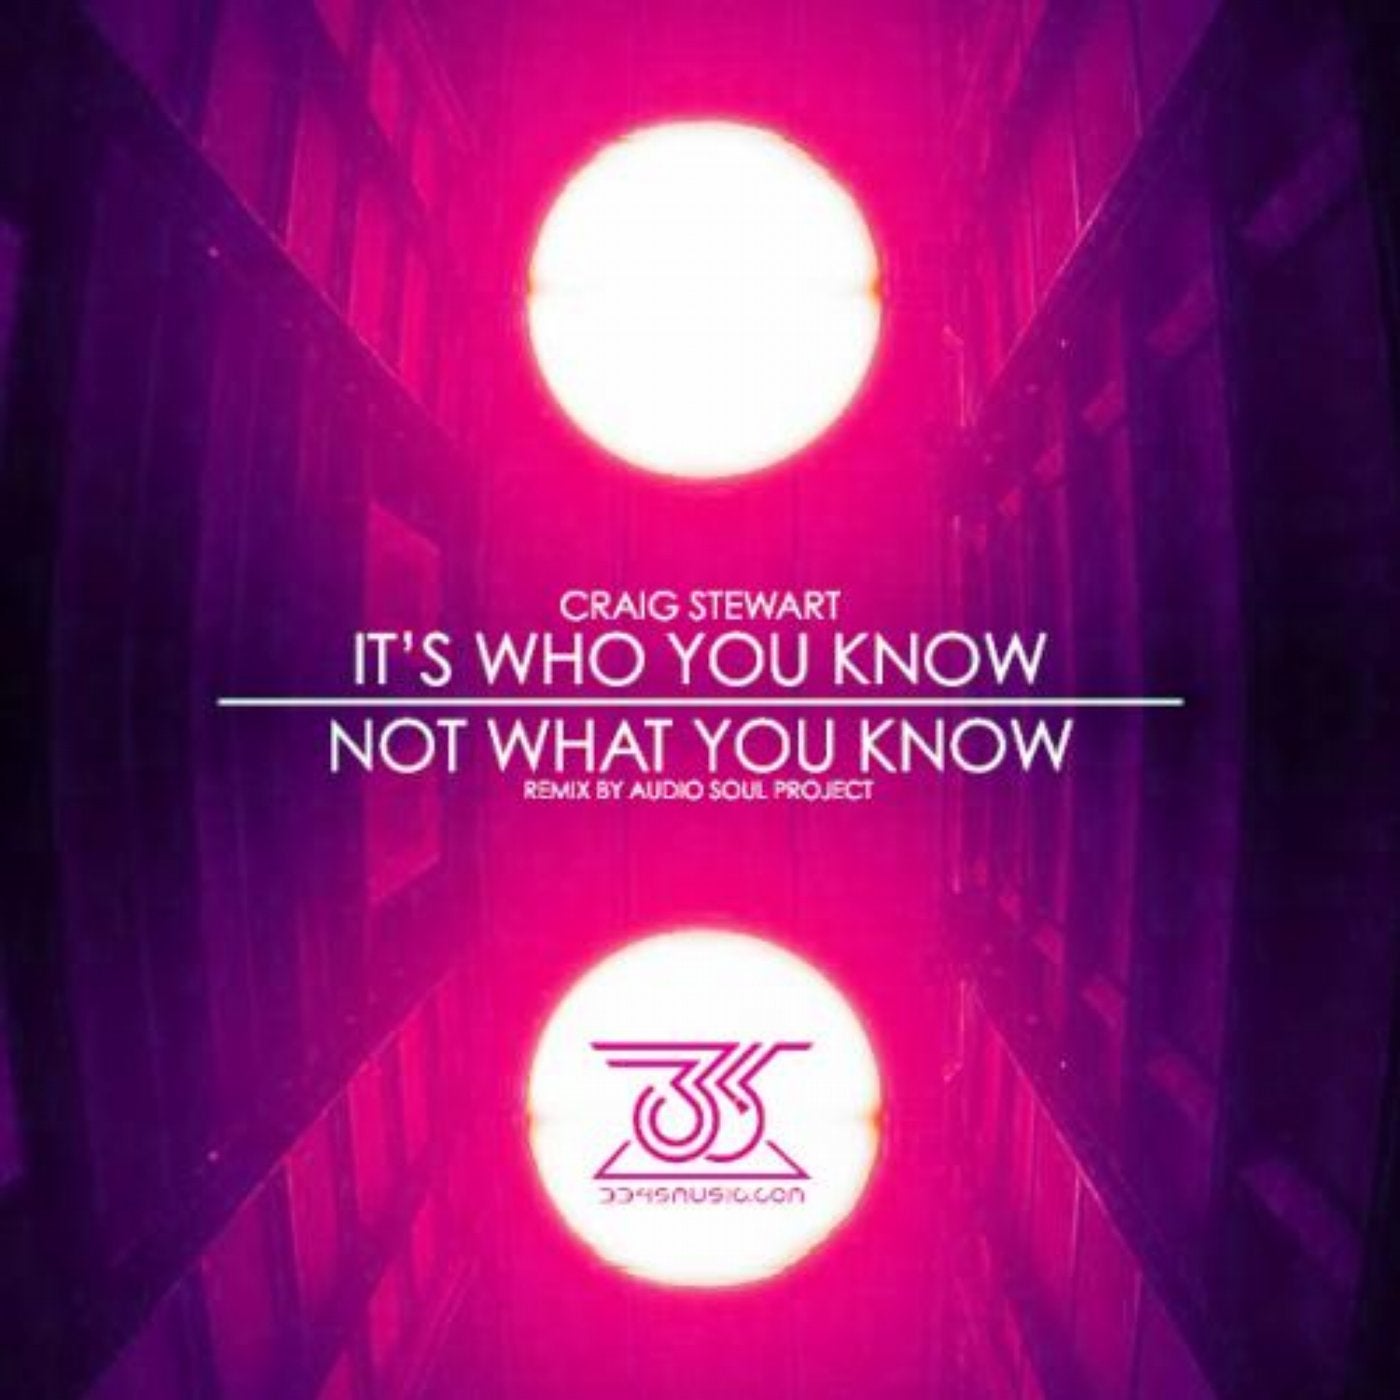 Not What You Know EP